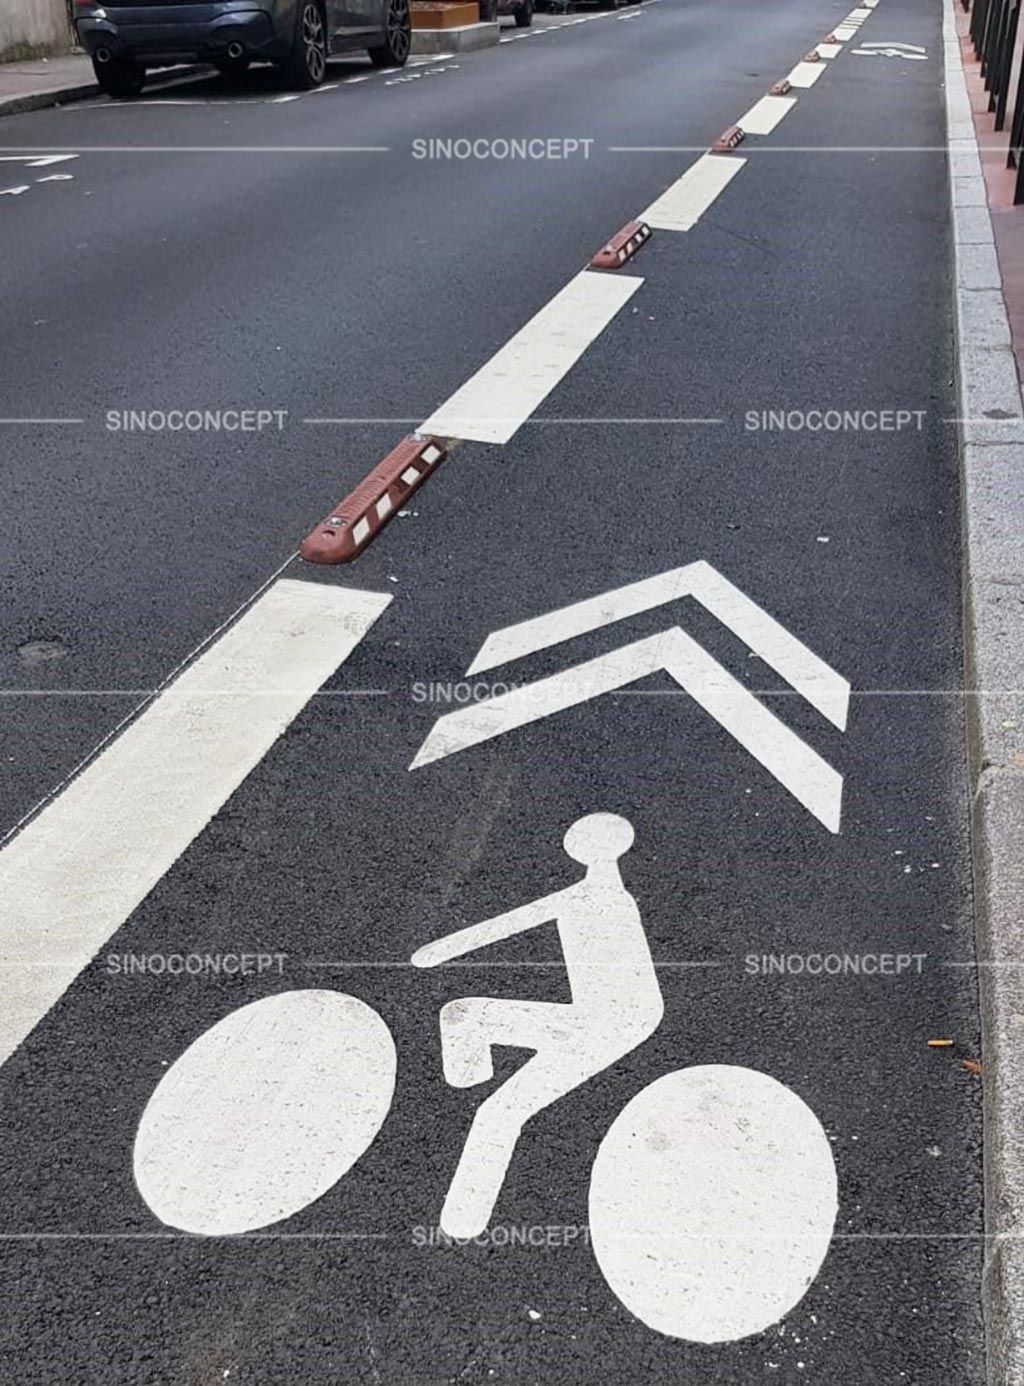 Red cycle lane dividers with road studs and white reflective films installed on the road to ensure traffic safety